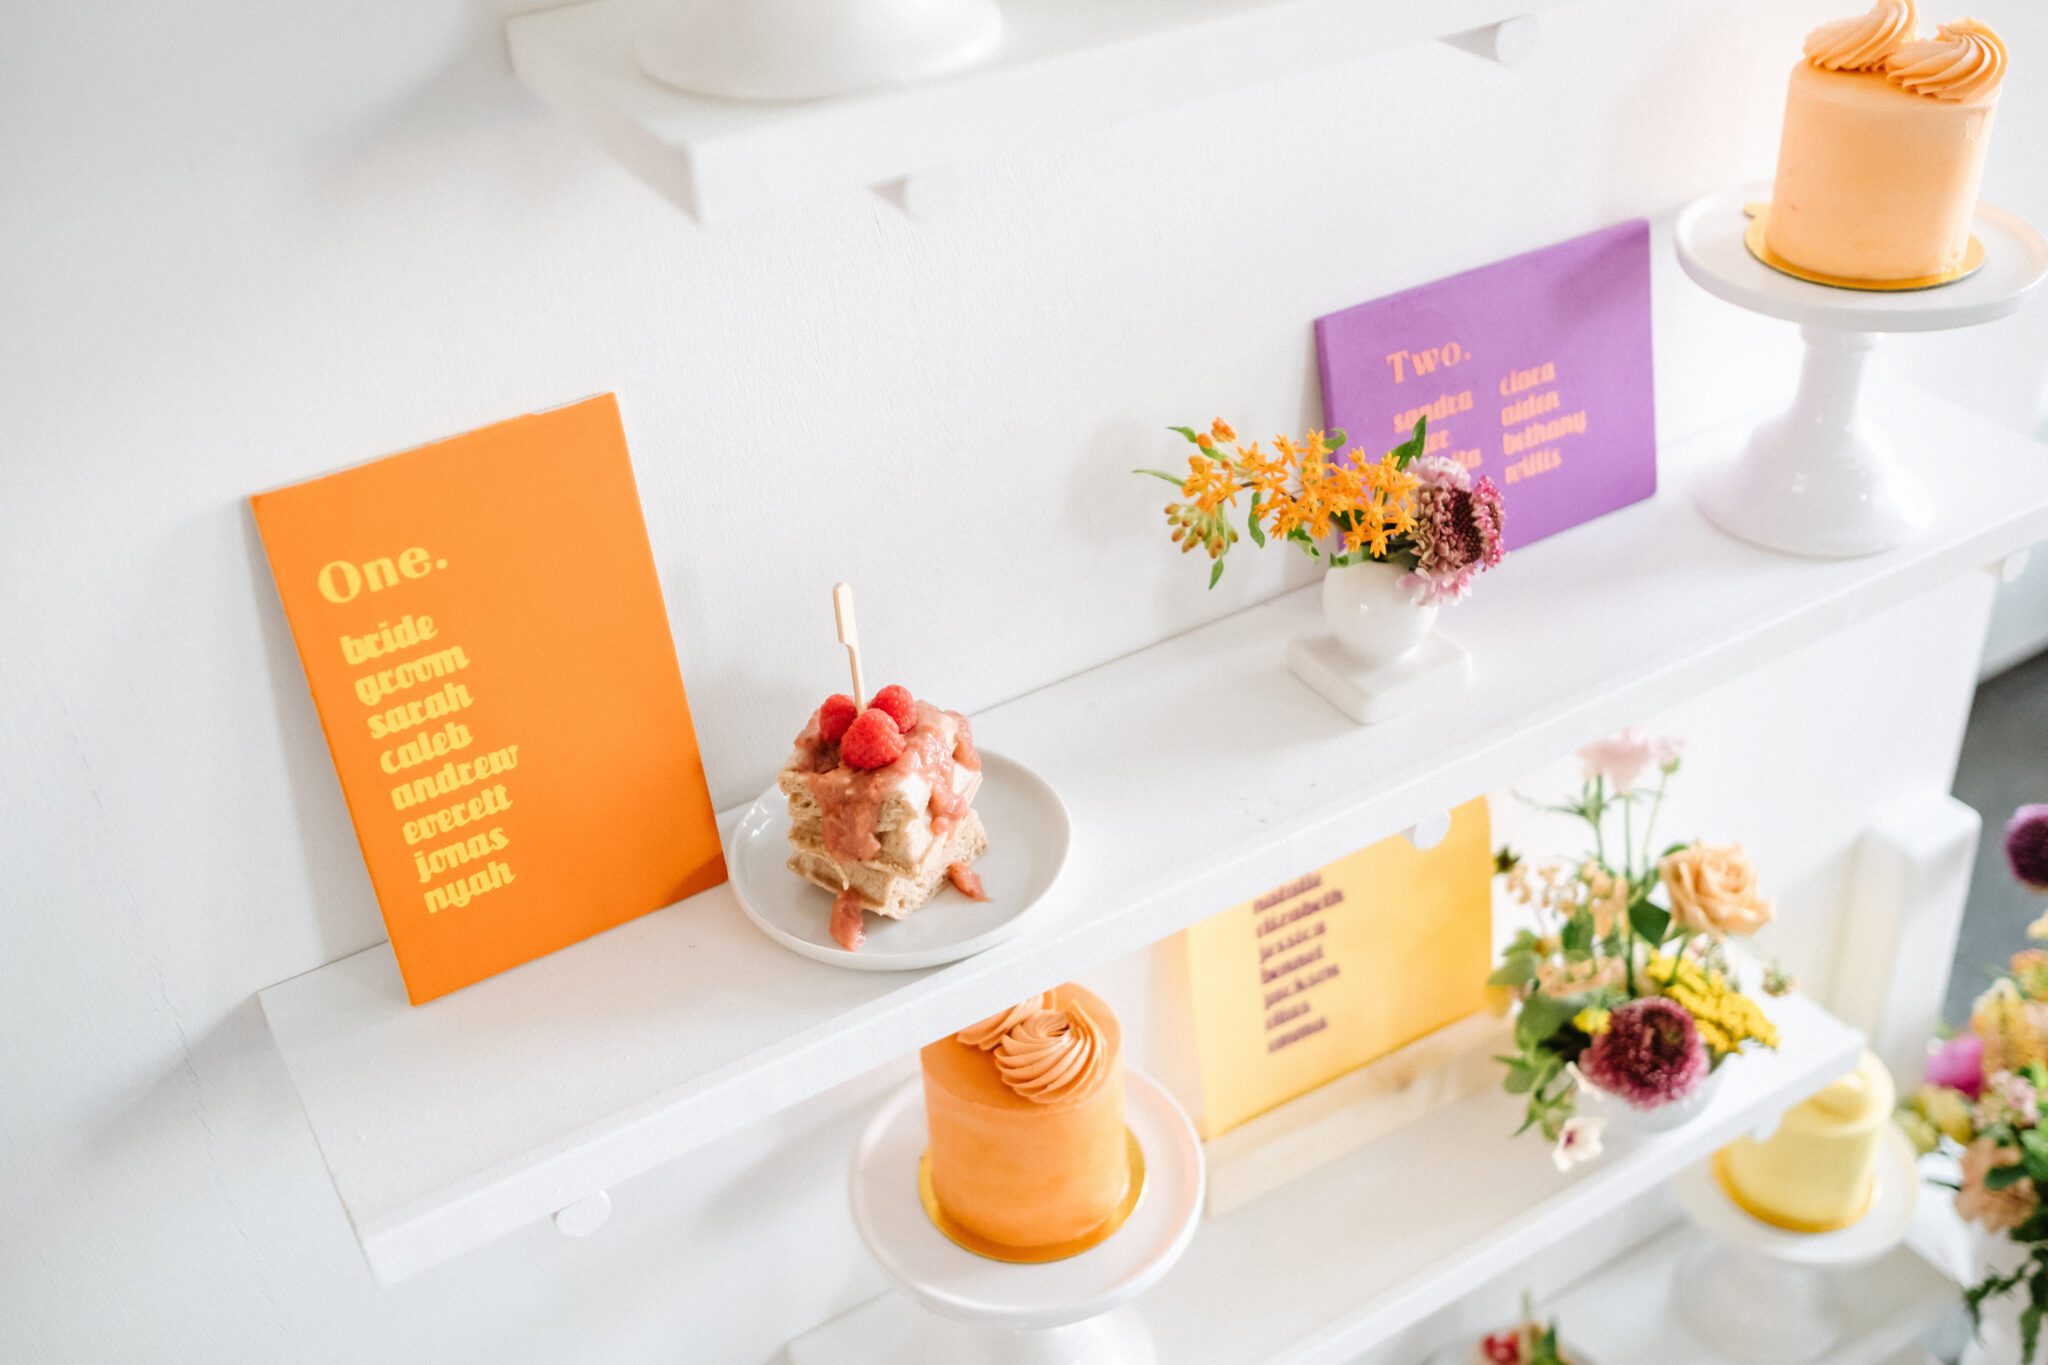 Bright and colourful wedding at The Brownstone Calgary, brunch wedding inspiration that combines mod style with retro decor. Tangerine, peach, purple and yellow colour scheme. Custom cocktails, retro inspired signage and custom mini wedding cakes.  